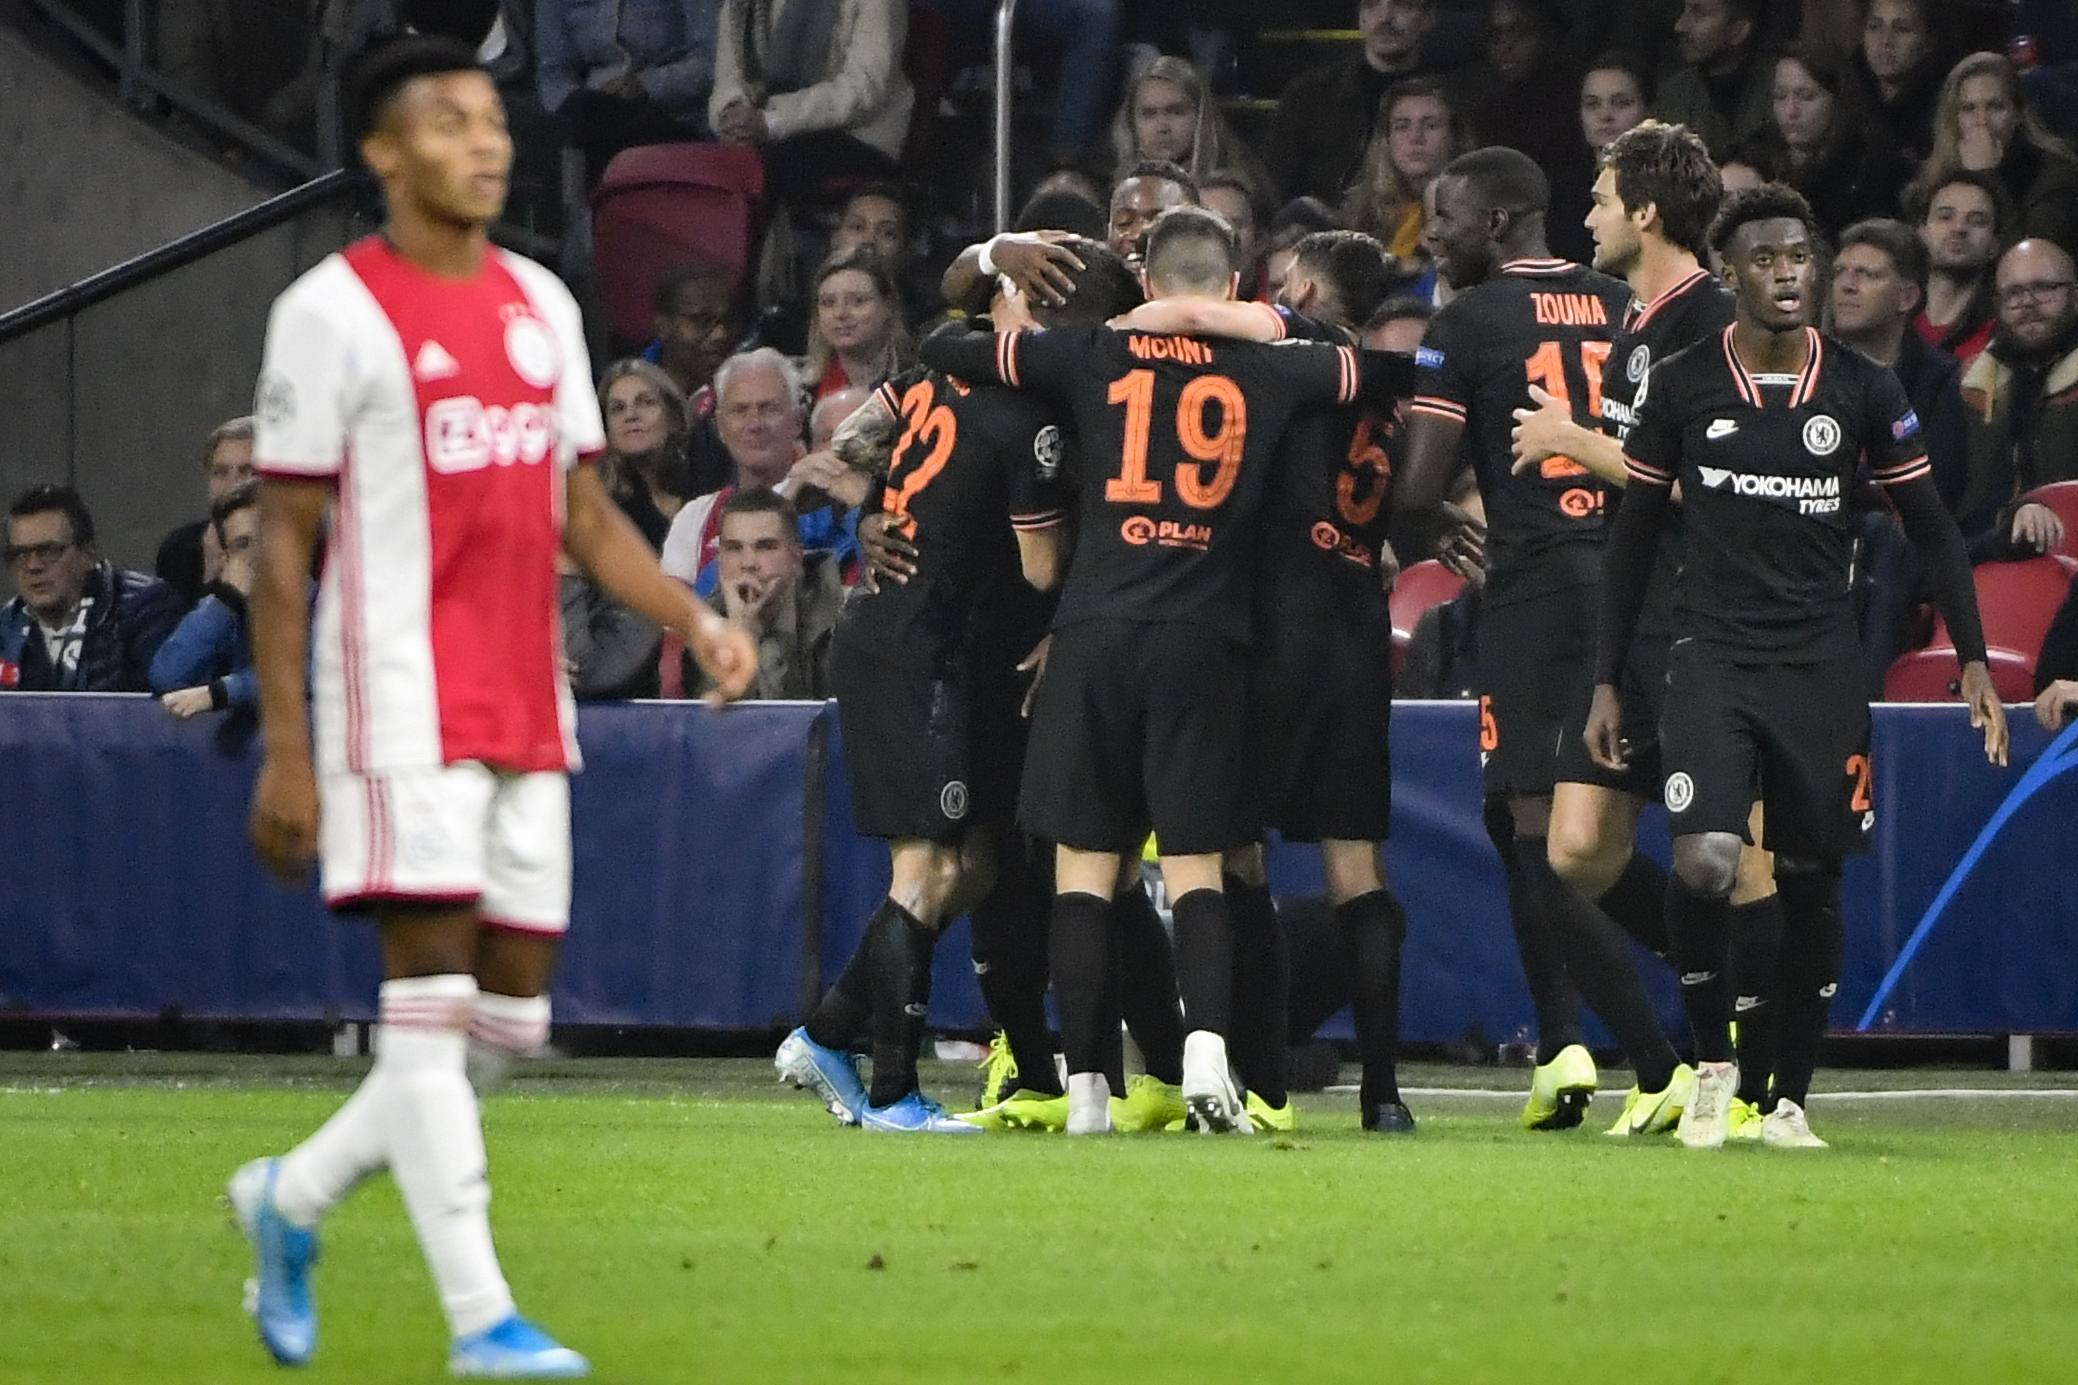 Chelsea's Belgian striker Michy Batshuayi celebrates with teammates after scoring a goal during the UEFA Champions League Group H football match between Ajax Amsterdam and Chelsea on October 23, 2019 at the Johan Cruijff Arena, in Amsterdam. (Photo by John THYS / AFP) (Photo by JOHN THYS/AFP via Getty Images)